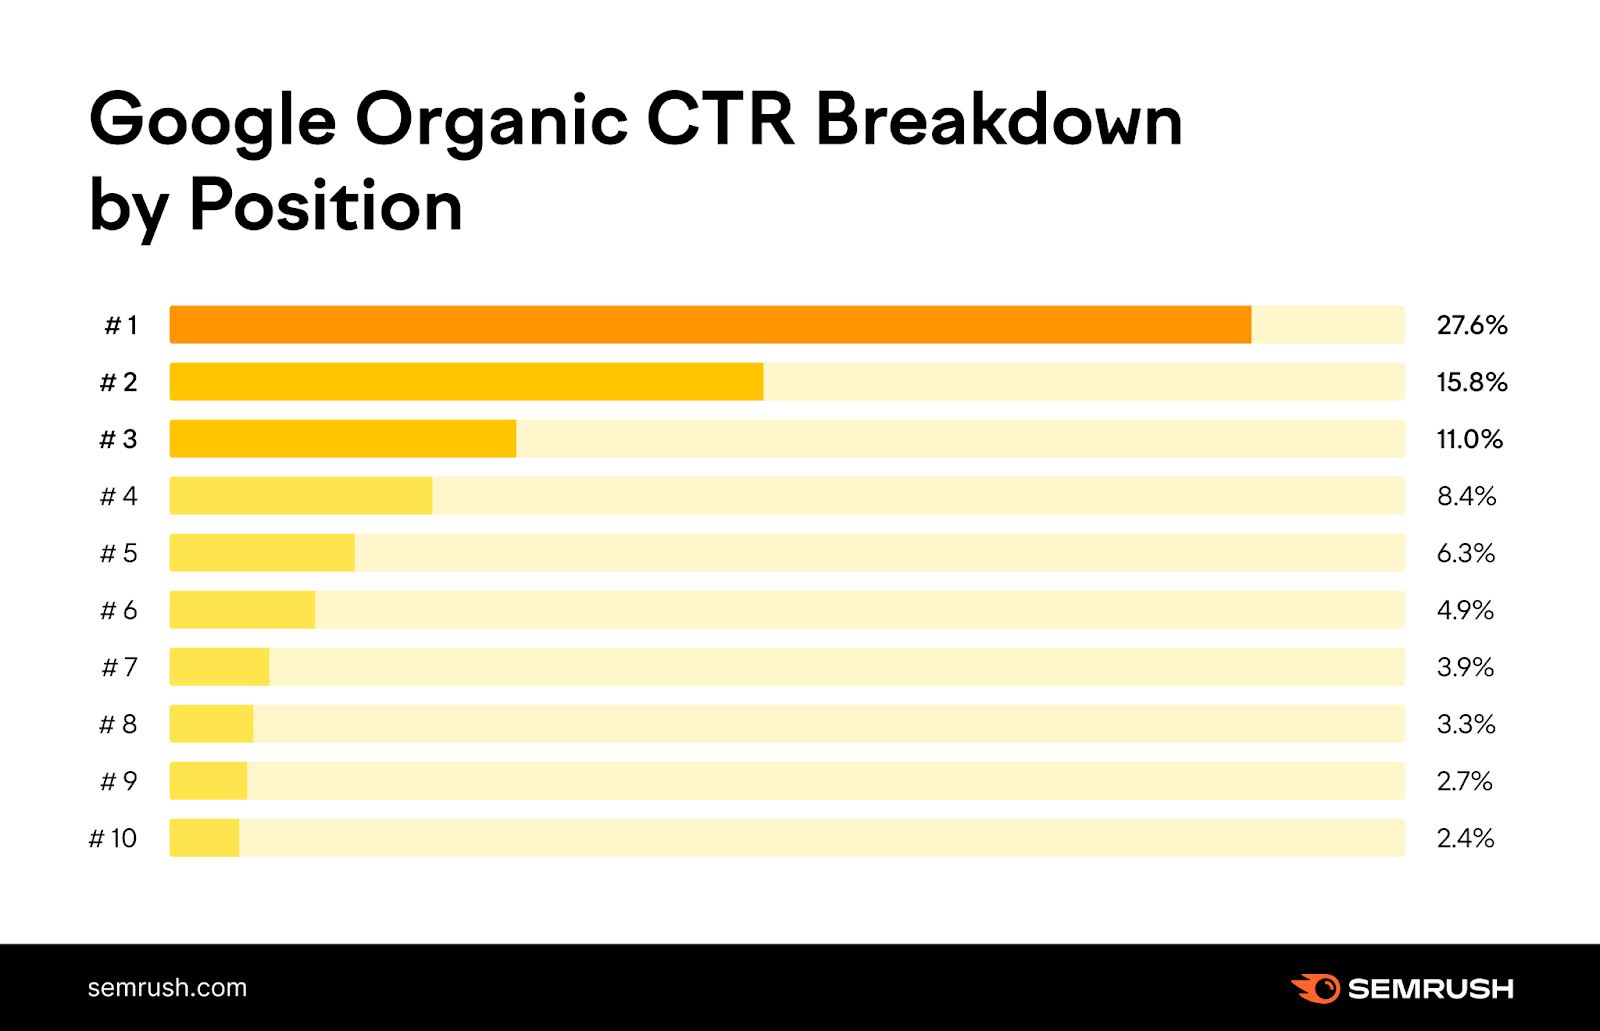 "Google Organic CTR Breakdown by Position" infographic